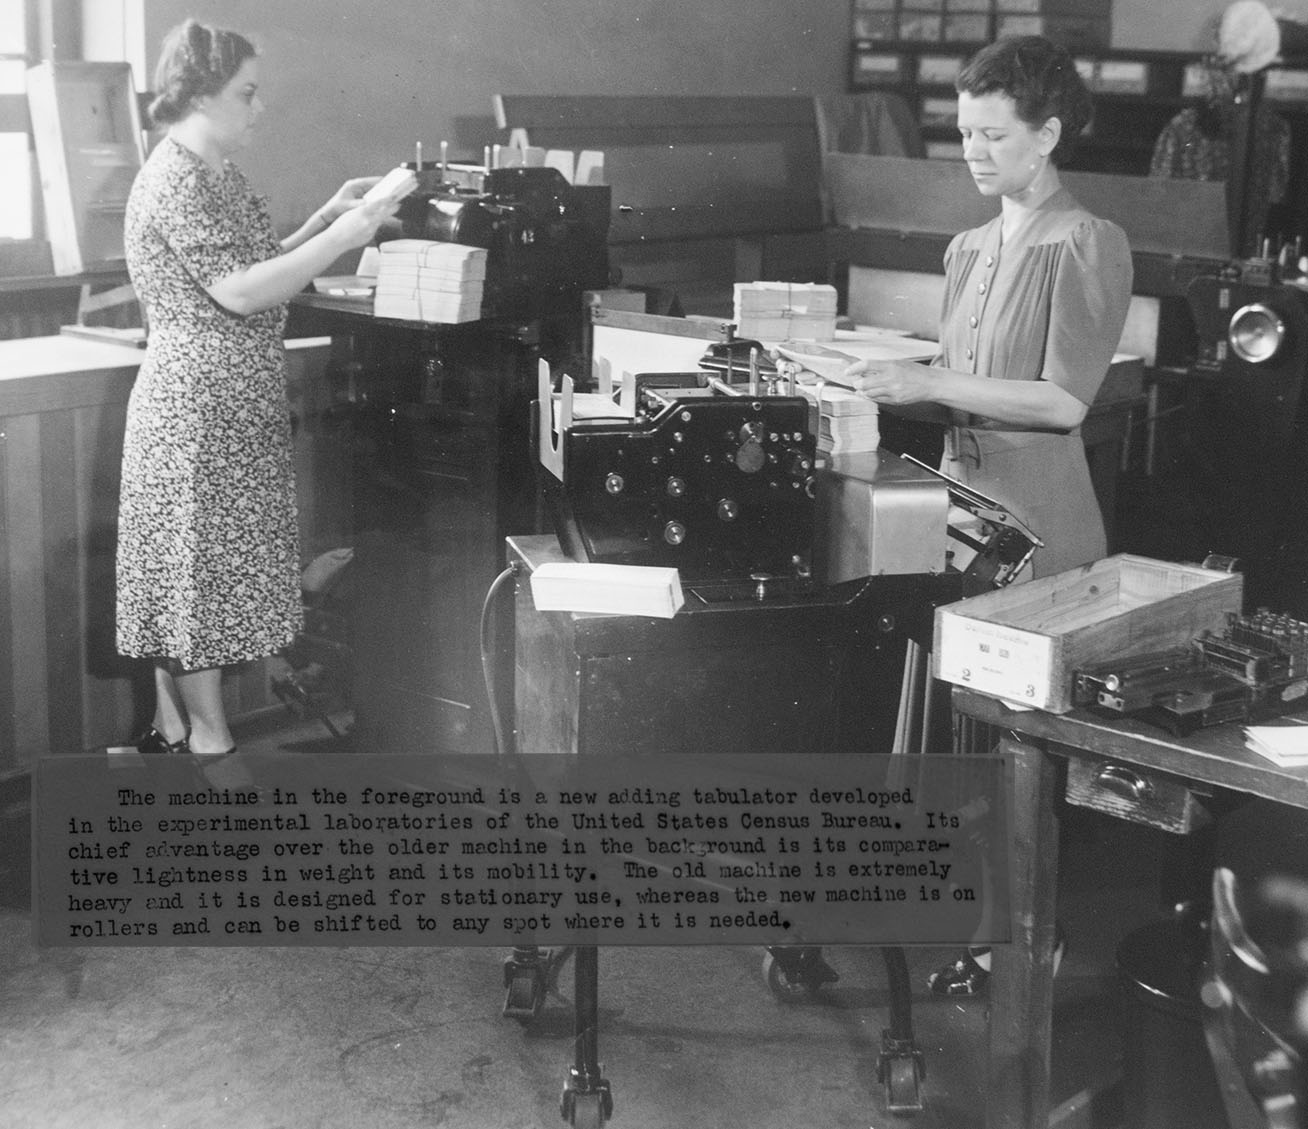 "The machine in the foreground is a new adding tabulator" featuring two women workers and two machines in what appears to be the mechanical lab